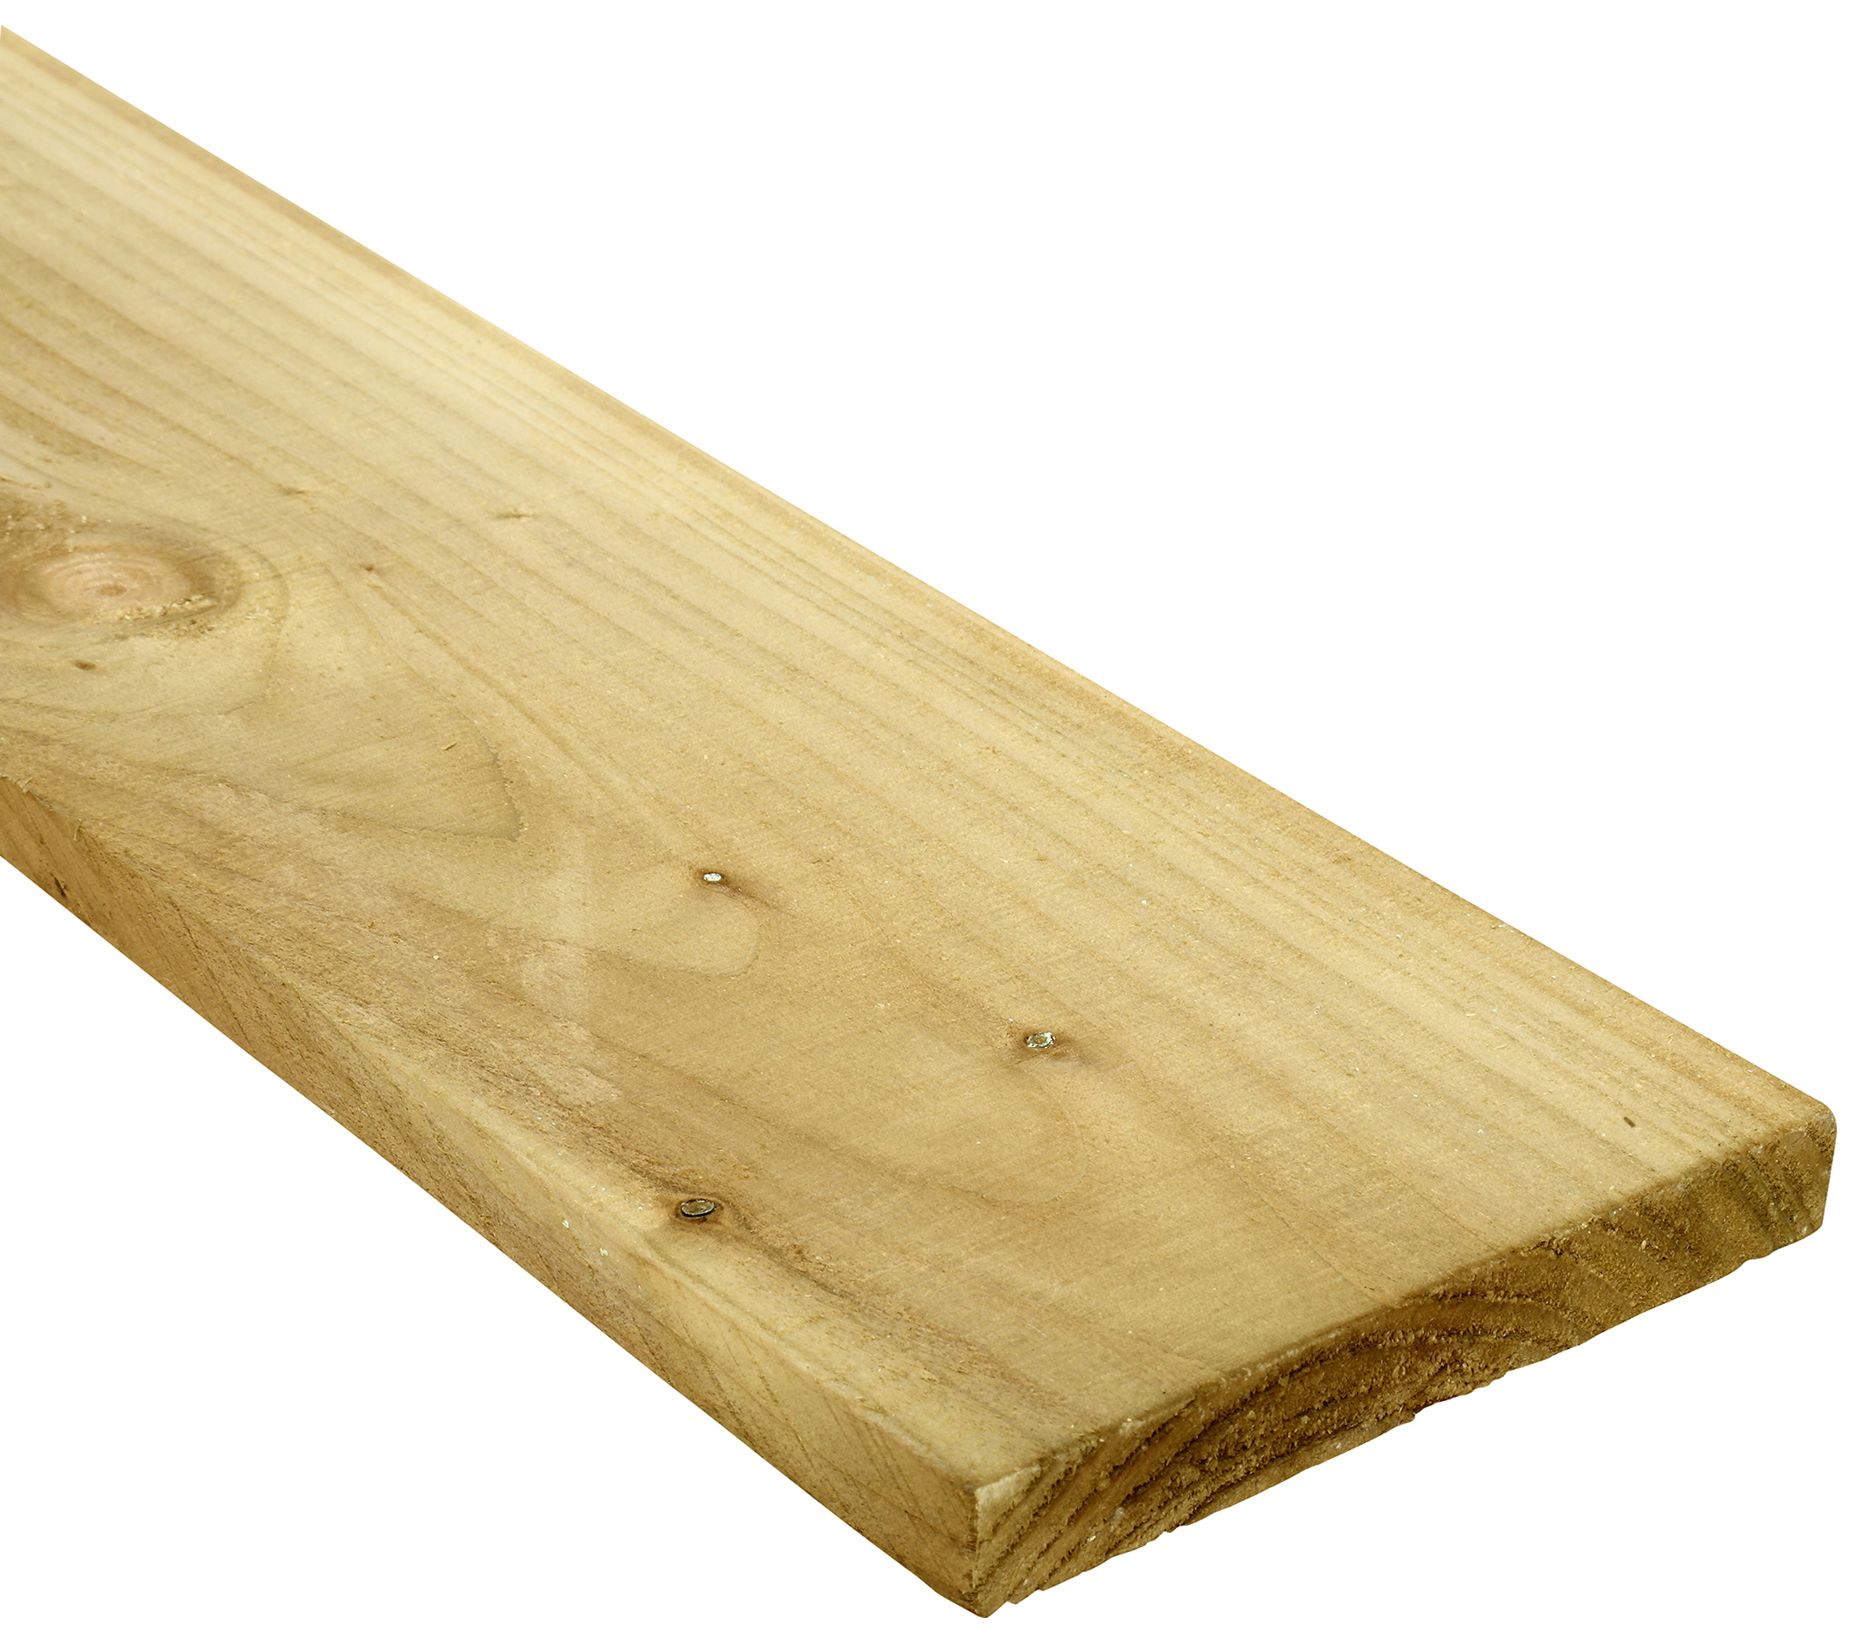 Image of Wickes Treated Sawn Timber - 22 x 150 x 2400mm